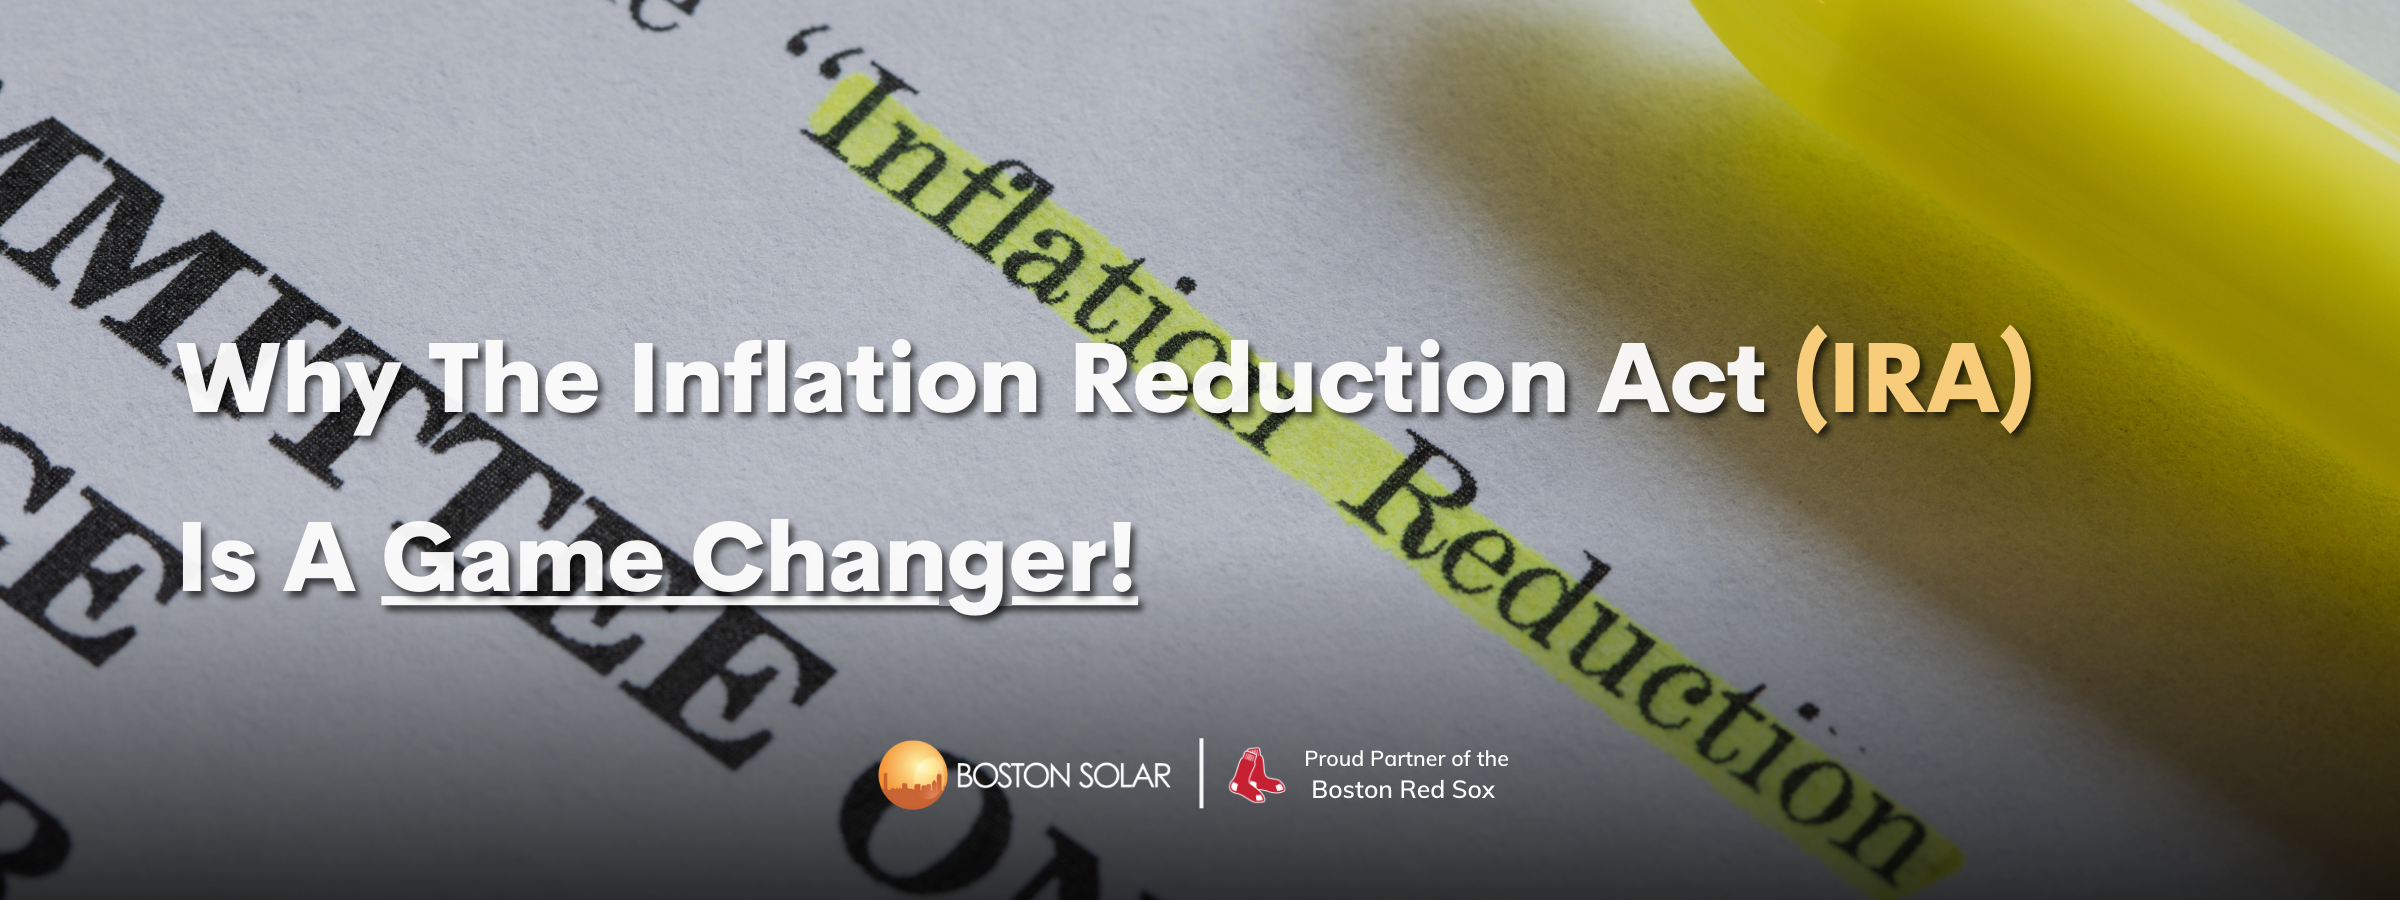 Inflation Reduction Act Is a Game Changer for Climate Action.